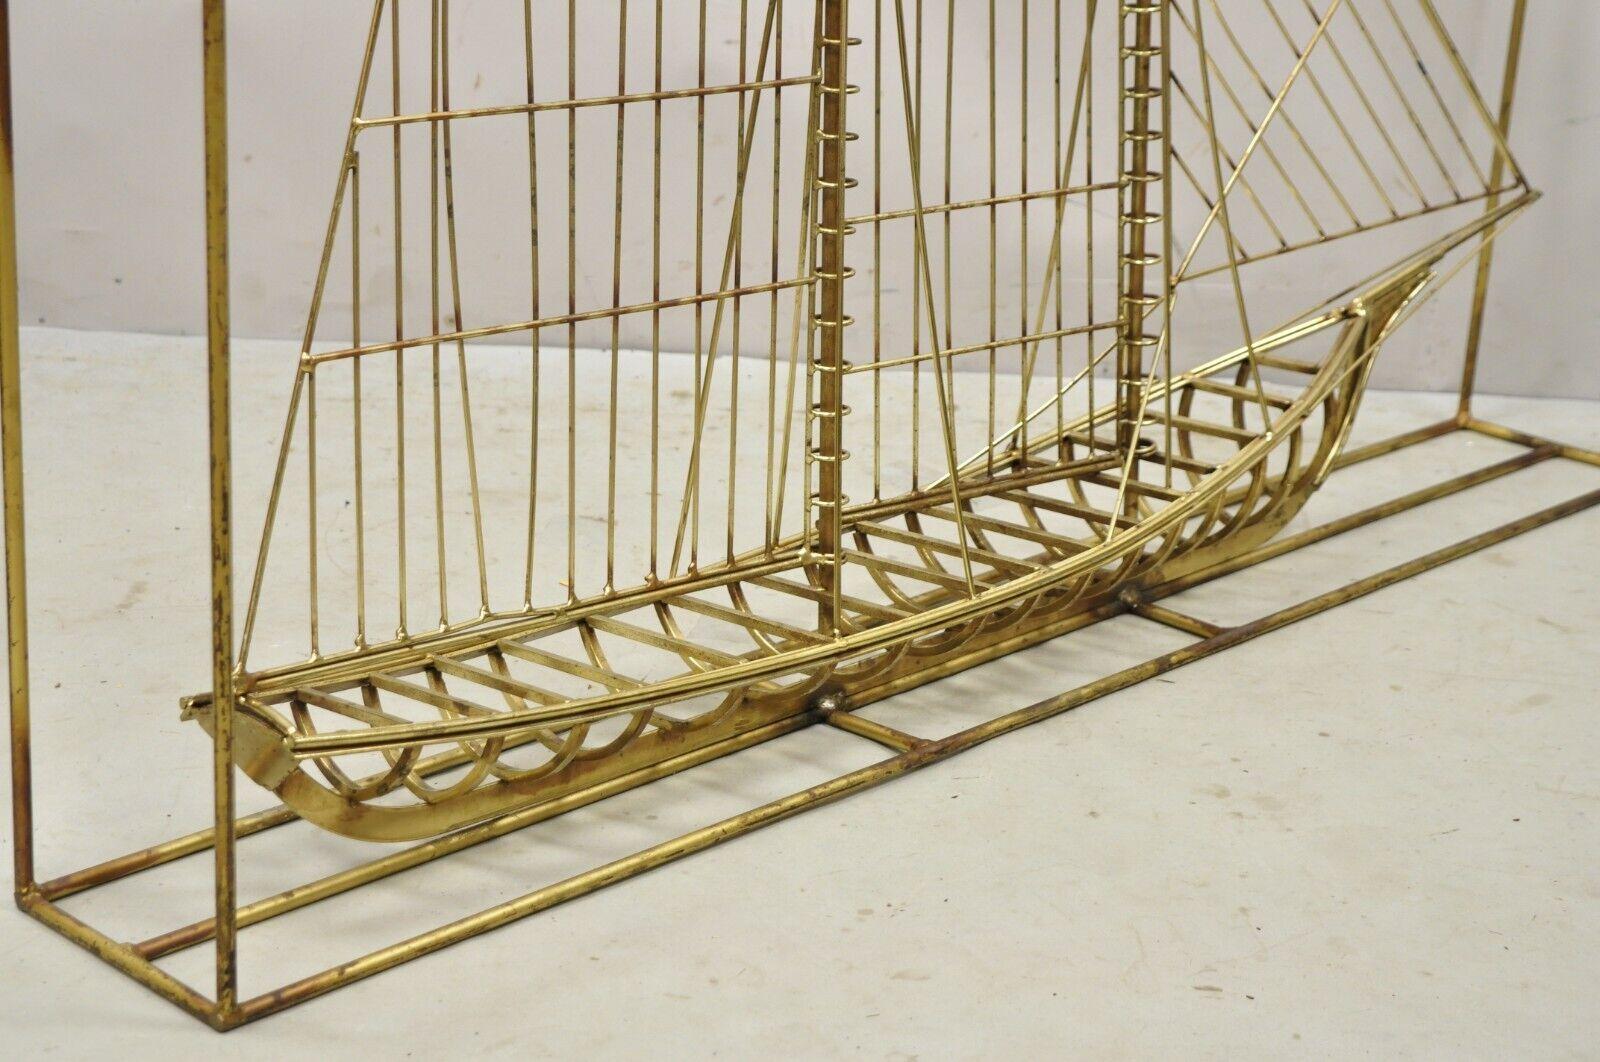 20th Century Large Curtis Jere Metal Clipper Ship 3d Sailboat Mid-Century Modern Sculpture For Sale